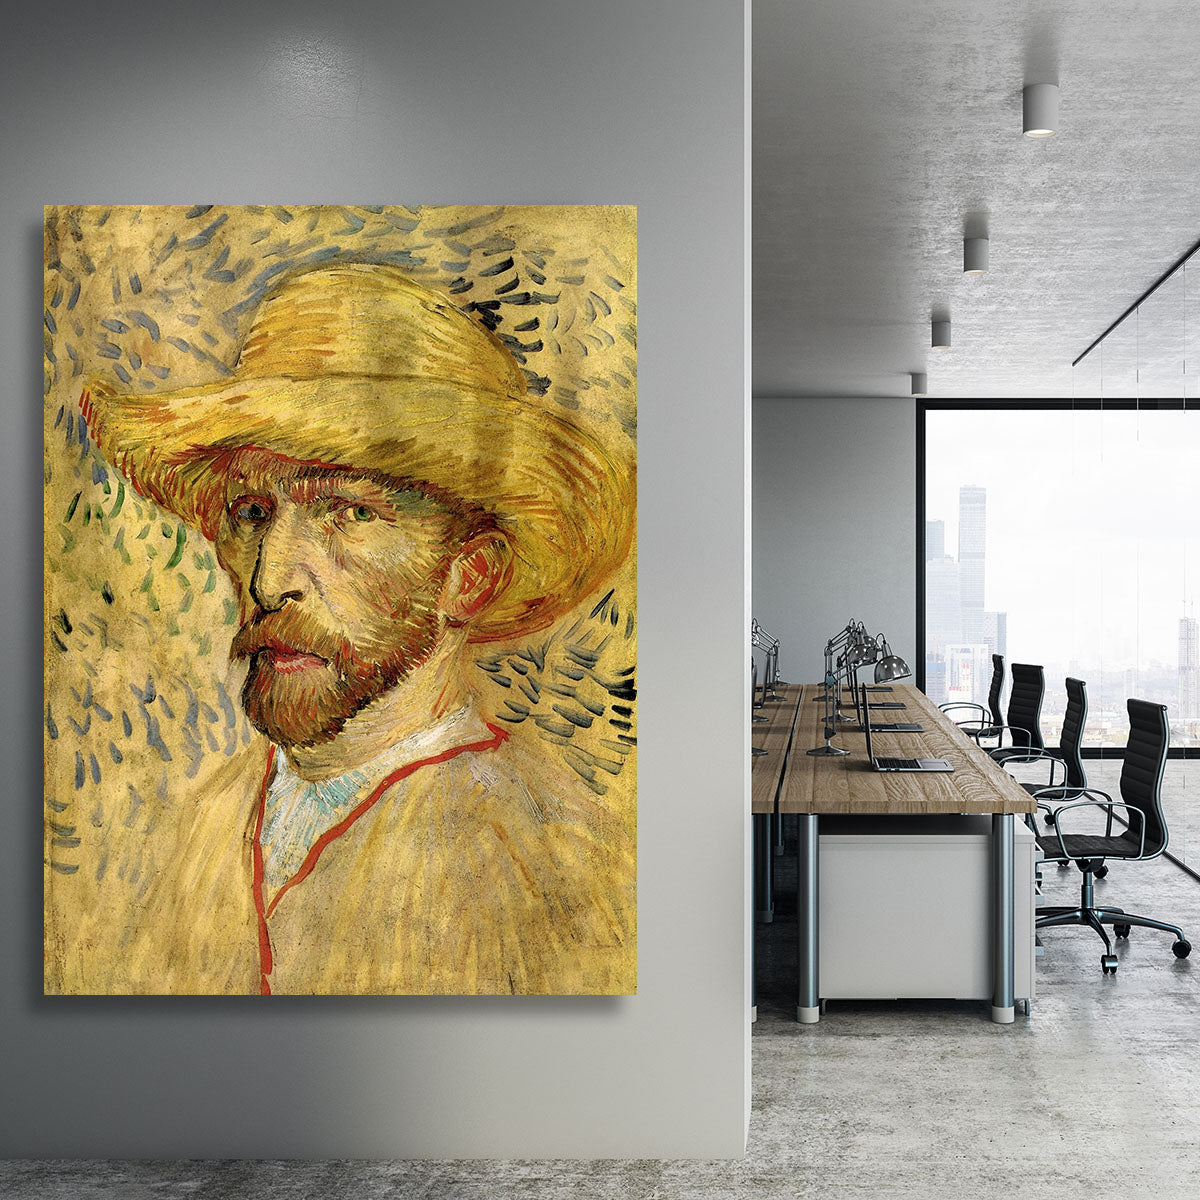 Self-Portrait with Straw Hat 2 by Van Gogh Canvas Print or Poster - Canvas Art Rocks - 3